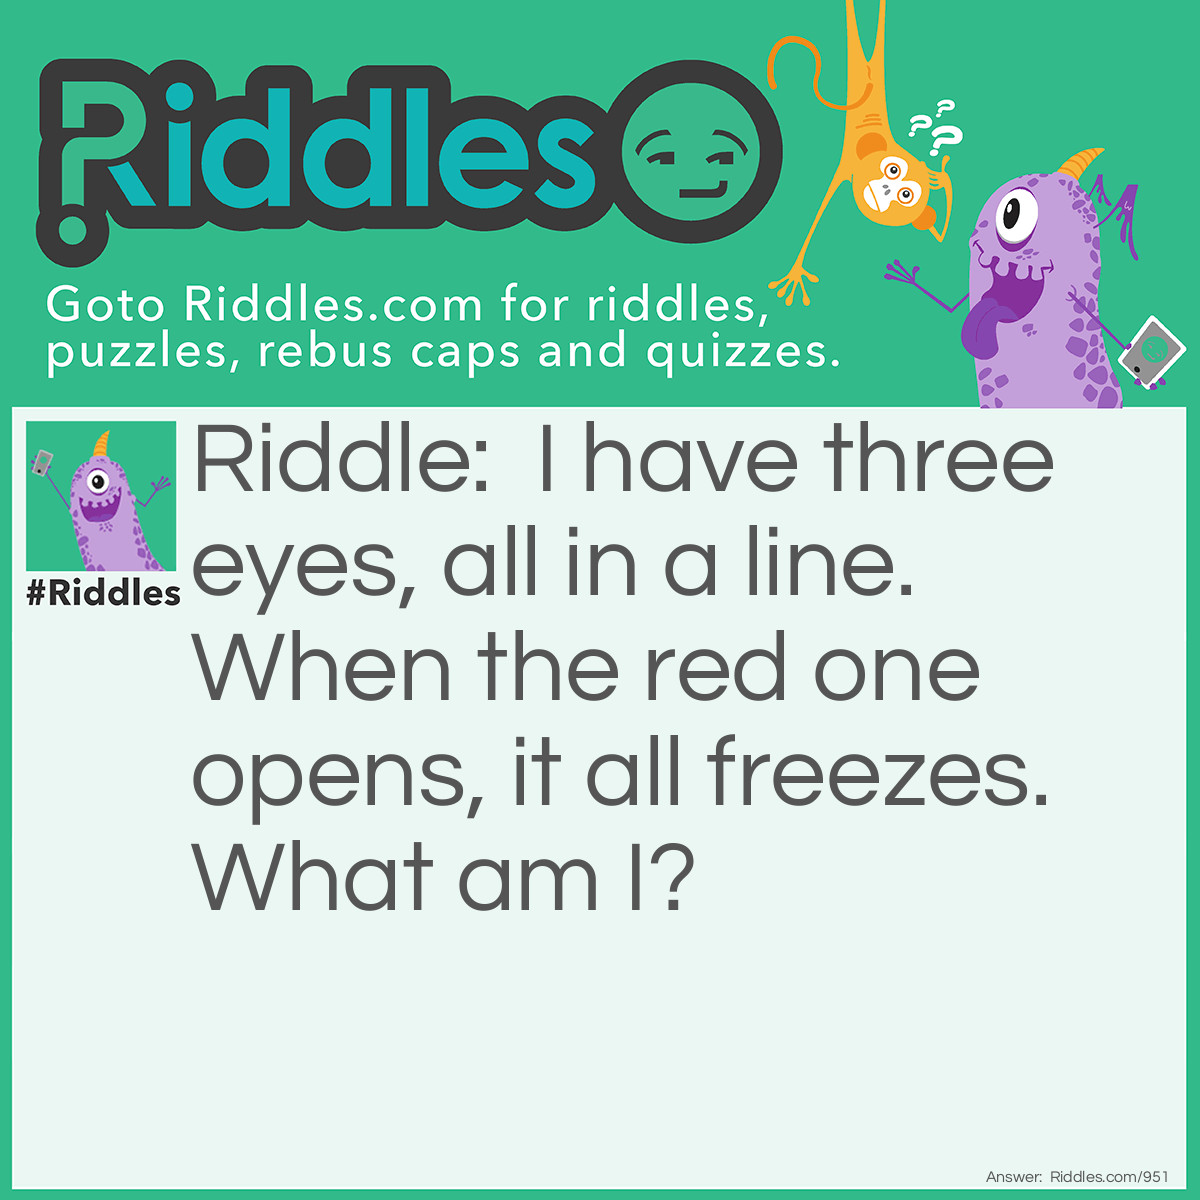 Riddle: I have three eyes, all in a line. When the red one opens, it all freezes. 
What am I? Answer: Traffic light.